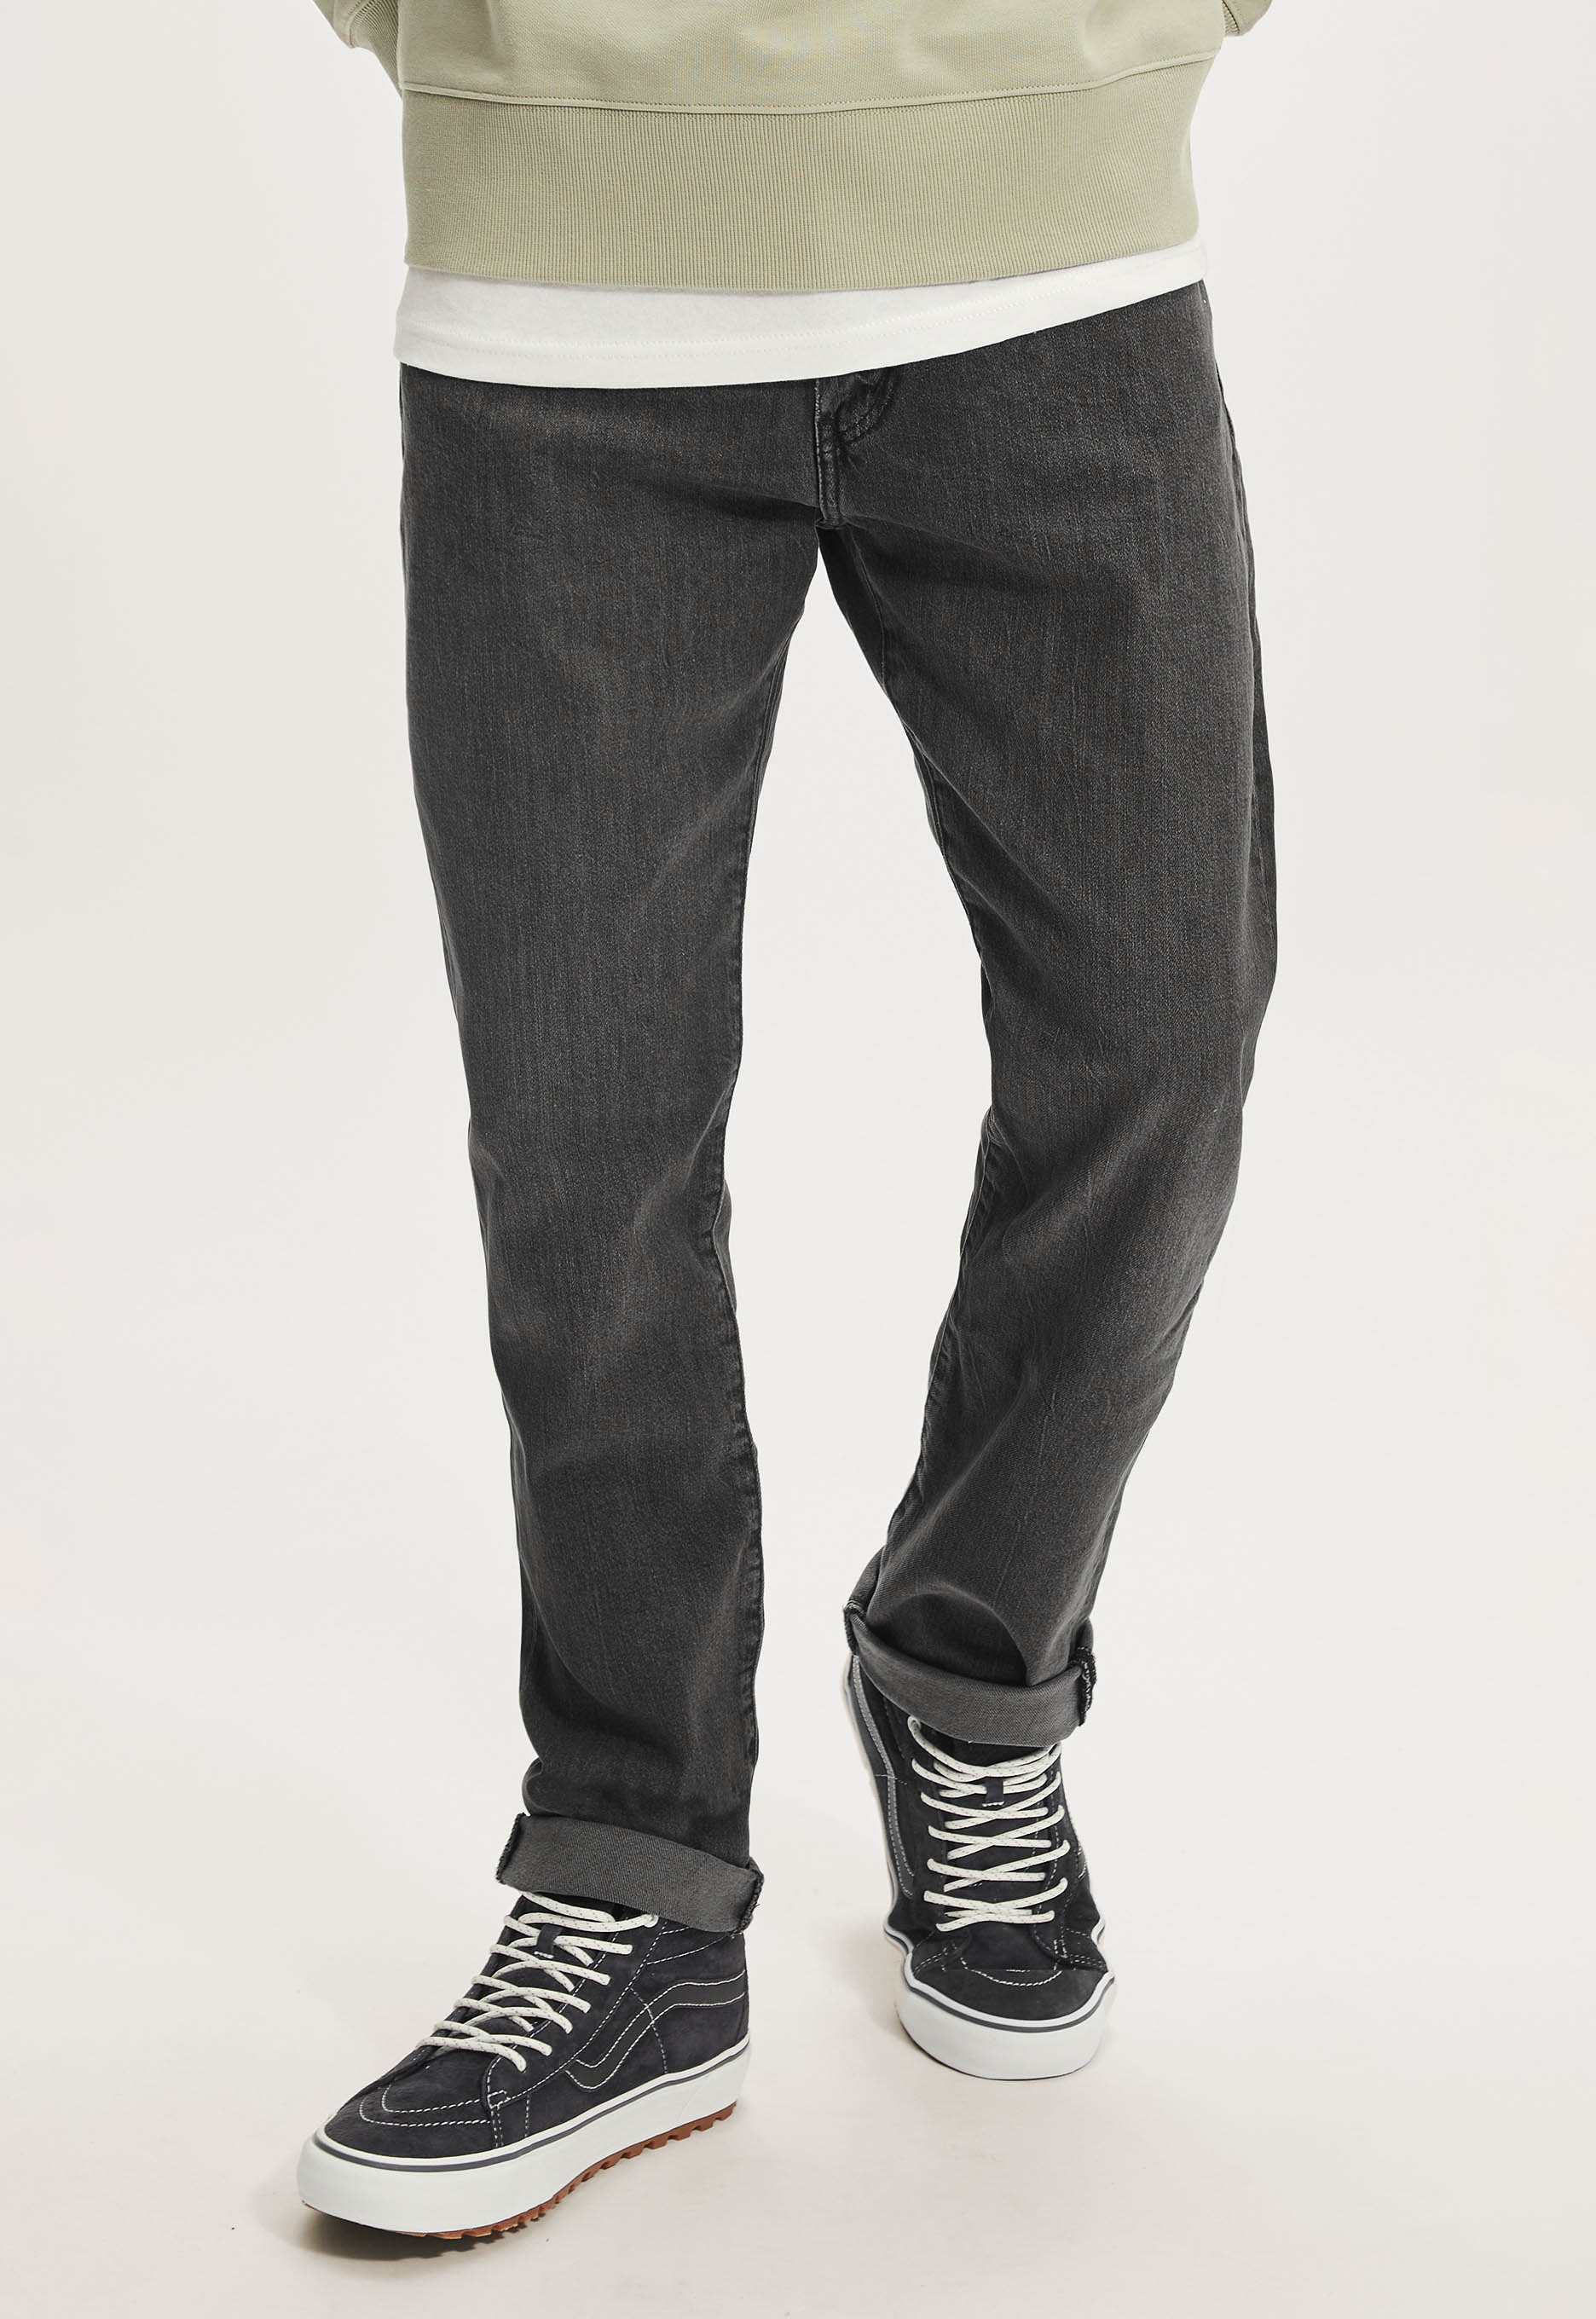 Levi's 502 Tapered Jeans